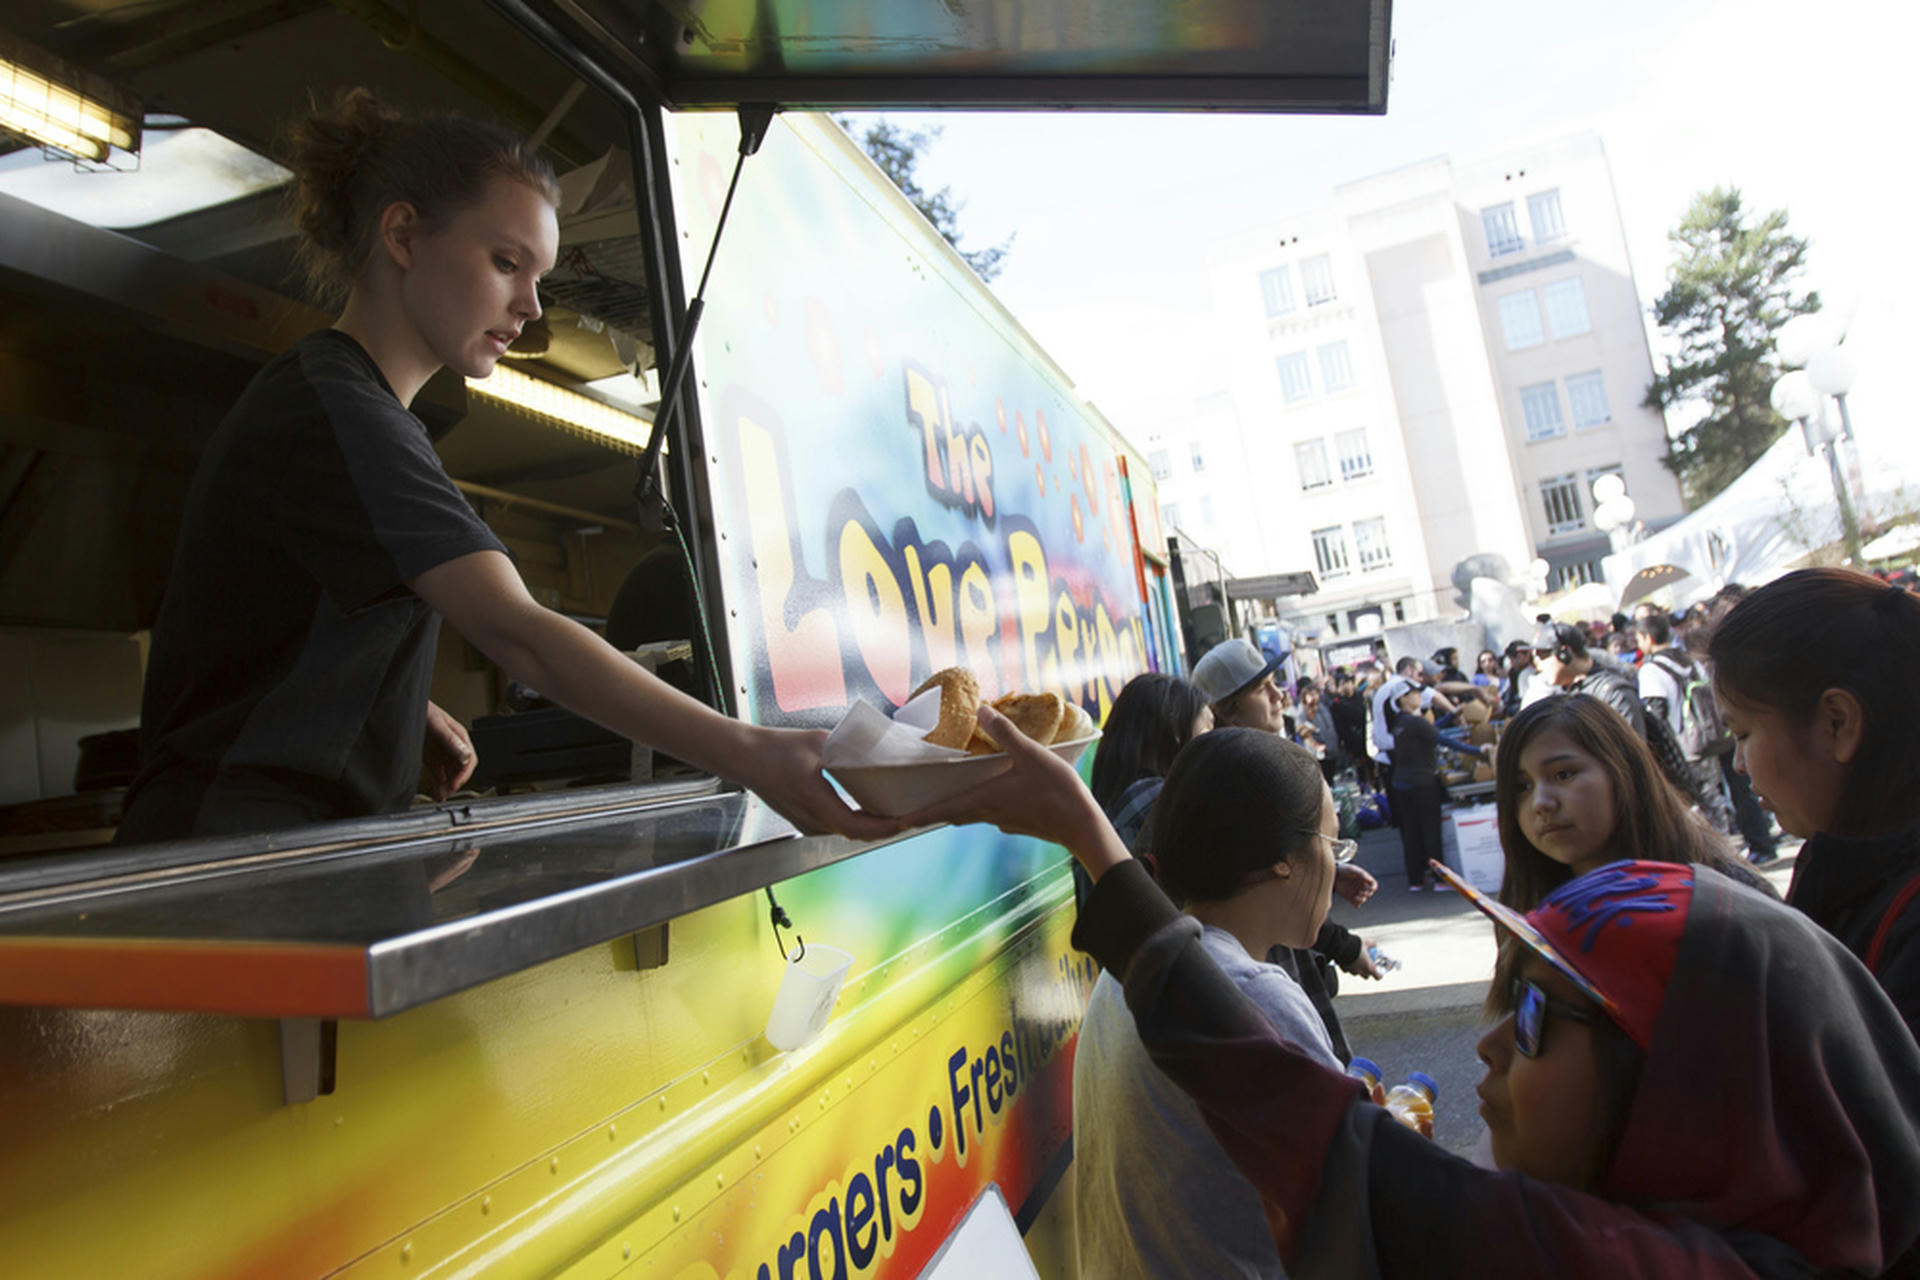 For lunch the youth all visited a local food truck fair and supported local businesses.